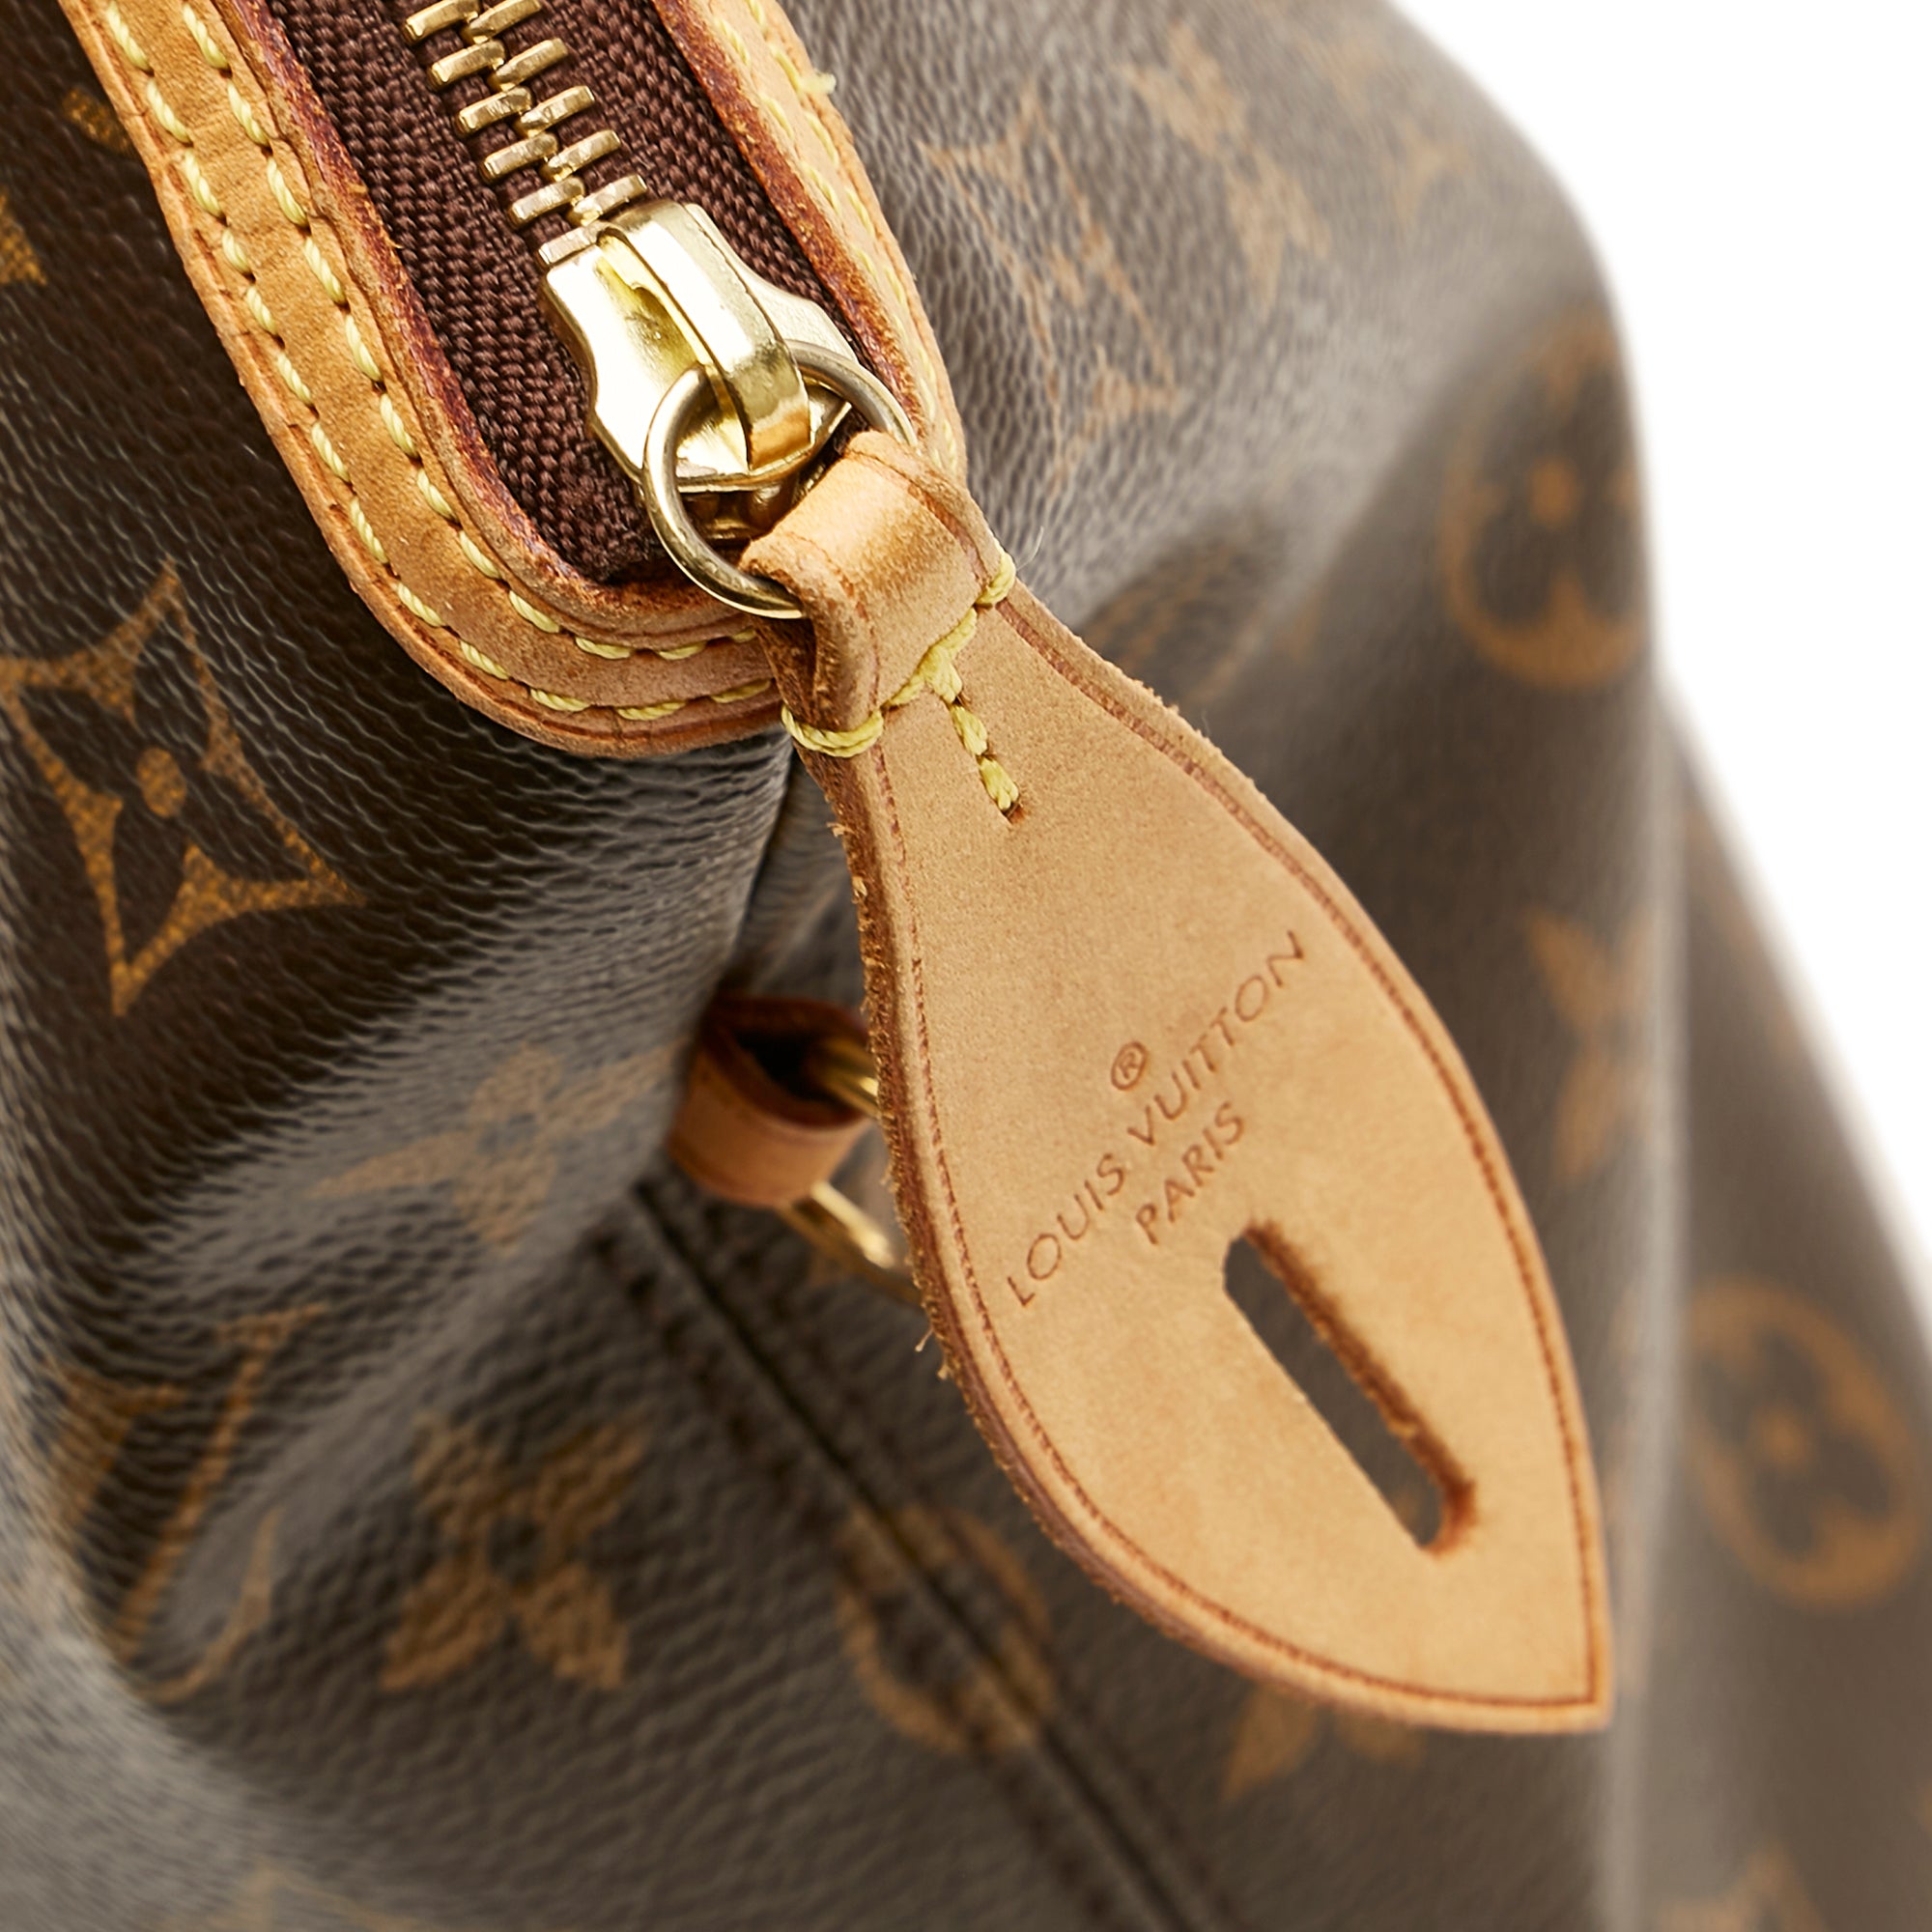 Lockit vertical leather handbag Louis Vuitton Brown in Leather